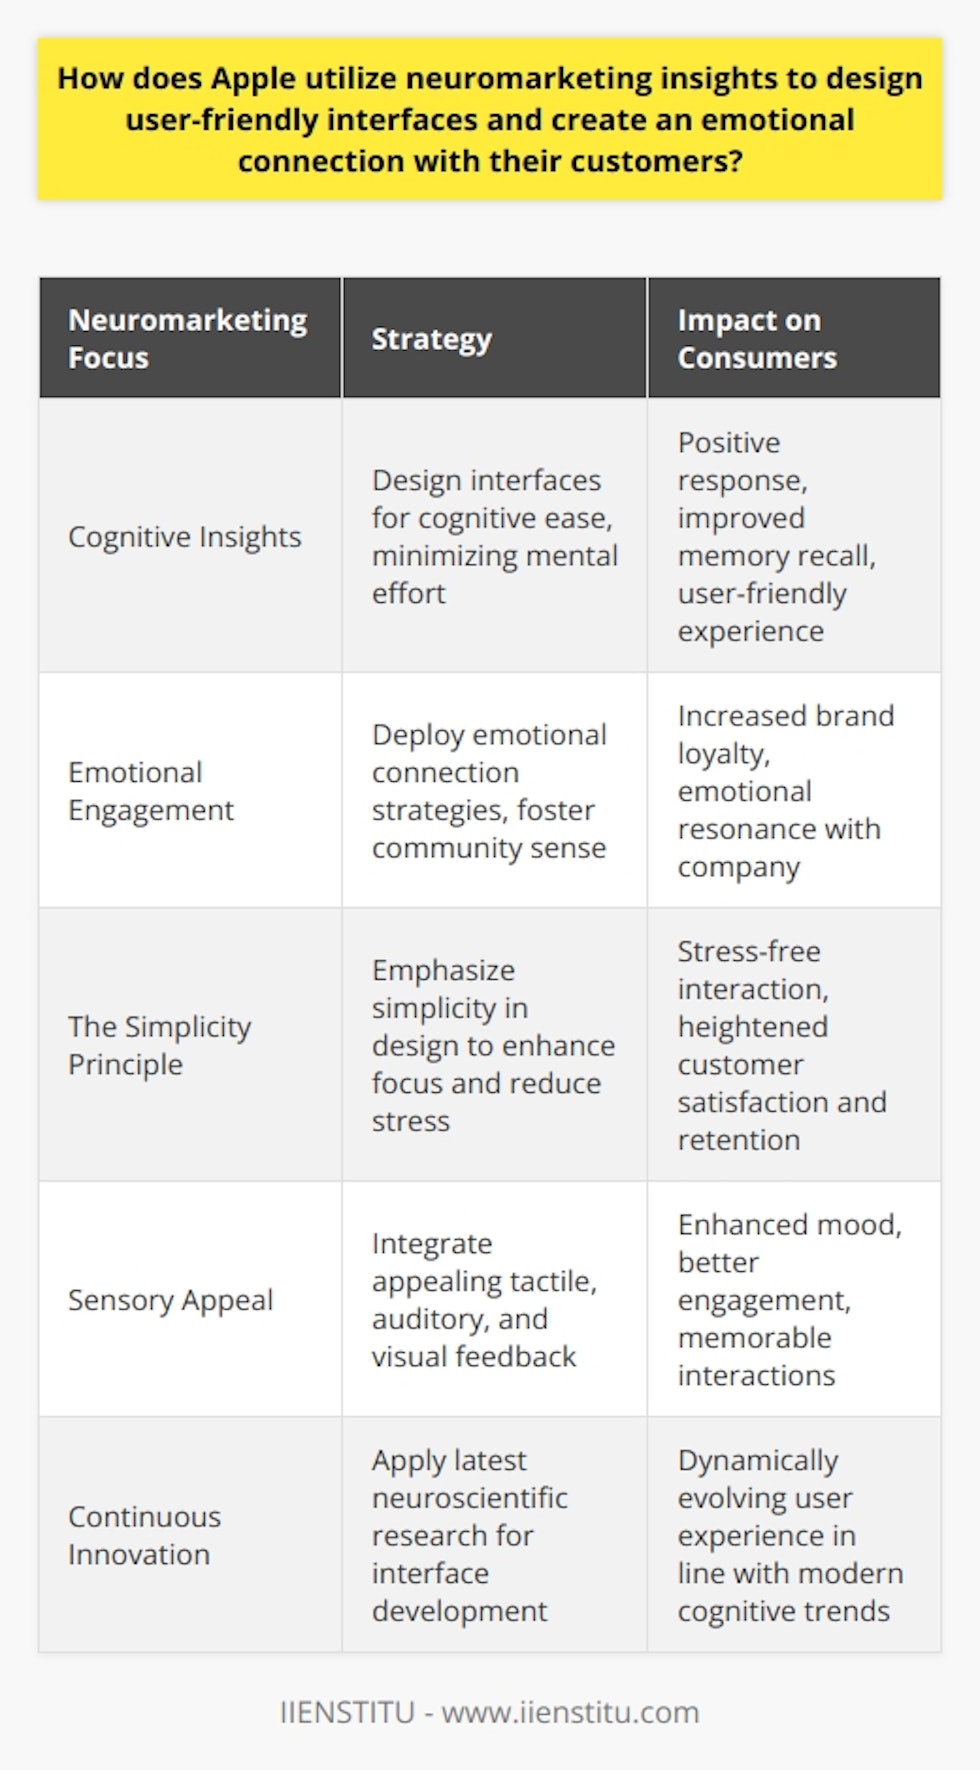 Apple's use of neuromarketing techniques is a testament to their dedication to understanding consumer behavior deeply. By analyzing the intricacies of their user's brain functions and responses, the company can craft user interfaces that are not only functional but emotionally appealing as well.Utilizing Cognitive InsightsAt the forefront of its neuromarketing efforts, Apple focuses on cognitive insights to simplify complex interactions. It recognizes that the human brain prefers to expend the least amount of energy necessary when processing information. Apple's user interfaces are therefore designed with a cognitively seamless experience that supports ease of learning and interaction, echoing the understanding that when a task is user-friendly, the brain is more likely to respond positively and remember the experience.Emotional EngagementBeyond mere functionality, Apple taps into emotional engagement strategies to create a sense of belonging and loyalty. The company's products are designed to resonate on an emotional level, often evoking a sense of community among users. Apple understands the power of emotional resonance and how certain stimuli can trigger a significant affective response, leading to a more profound brand connection.The Simplicity PrincipleFundamental to Apple's design philosophy, the principle of simplicity plays a critical role. The brain craves simplicity, and complex designs or functionalities can lead to disengagement. By minimizing distractions and focusing on the essentials, Apple's interfaces allow users to concentrate on their tasks without unnecessary complications. This approach reinforces a stress-free interaction, which is paramount for customer satisfaction and loyalty.Sensory AppealThe sensory appeal is another dimension where neuromarketing insights are evident in Apple's strategy. They incorporate specific tactile responses, auditory feedback, and visual cues that align with neurological studies on sensory stimulation. These elements have been shown to influence mood and recall, subtly encouraging prolonged engagement with the technology.Continuous InnovationFinally, Apple's commitment to continuous innovation is underpinned by their use of neuromarketing. By keeping up with the latest in neuroscientific research, Apple ensures that its interfaces evolve to meet the changing ways in which consumers process information and form attachments.In essence, Apple's application of neuromarketing insights is pivotal in constructing user interfaces that are not only easy to navigate but also emotionally compelling. This strategic integration has played a significant role in their success, allowing for a brand affinity that is both instinctive and enduring. Such neuromarketing strategies solidify Apple's reputation as an empathetic and user-centric brand within the technology space.